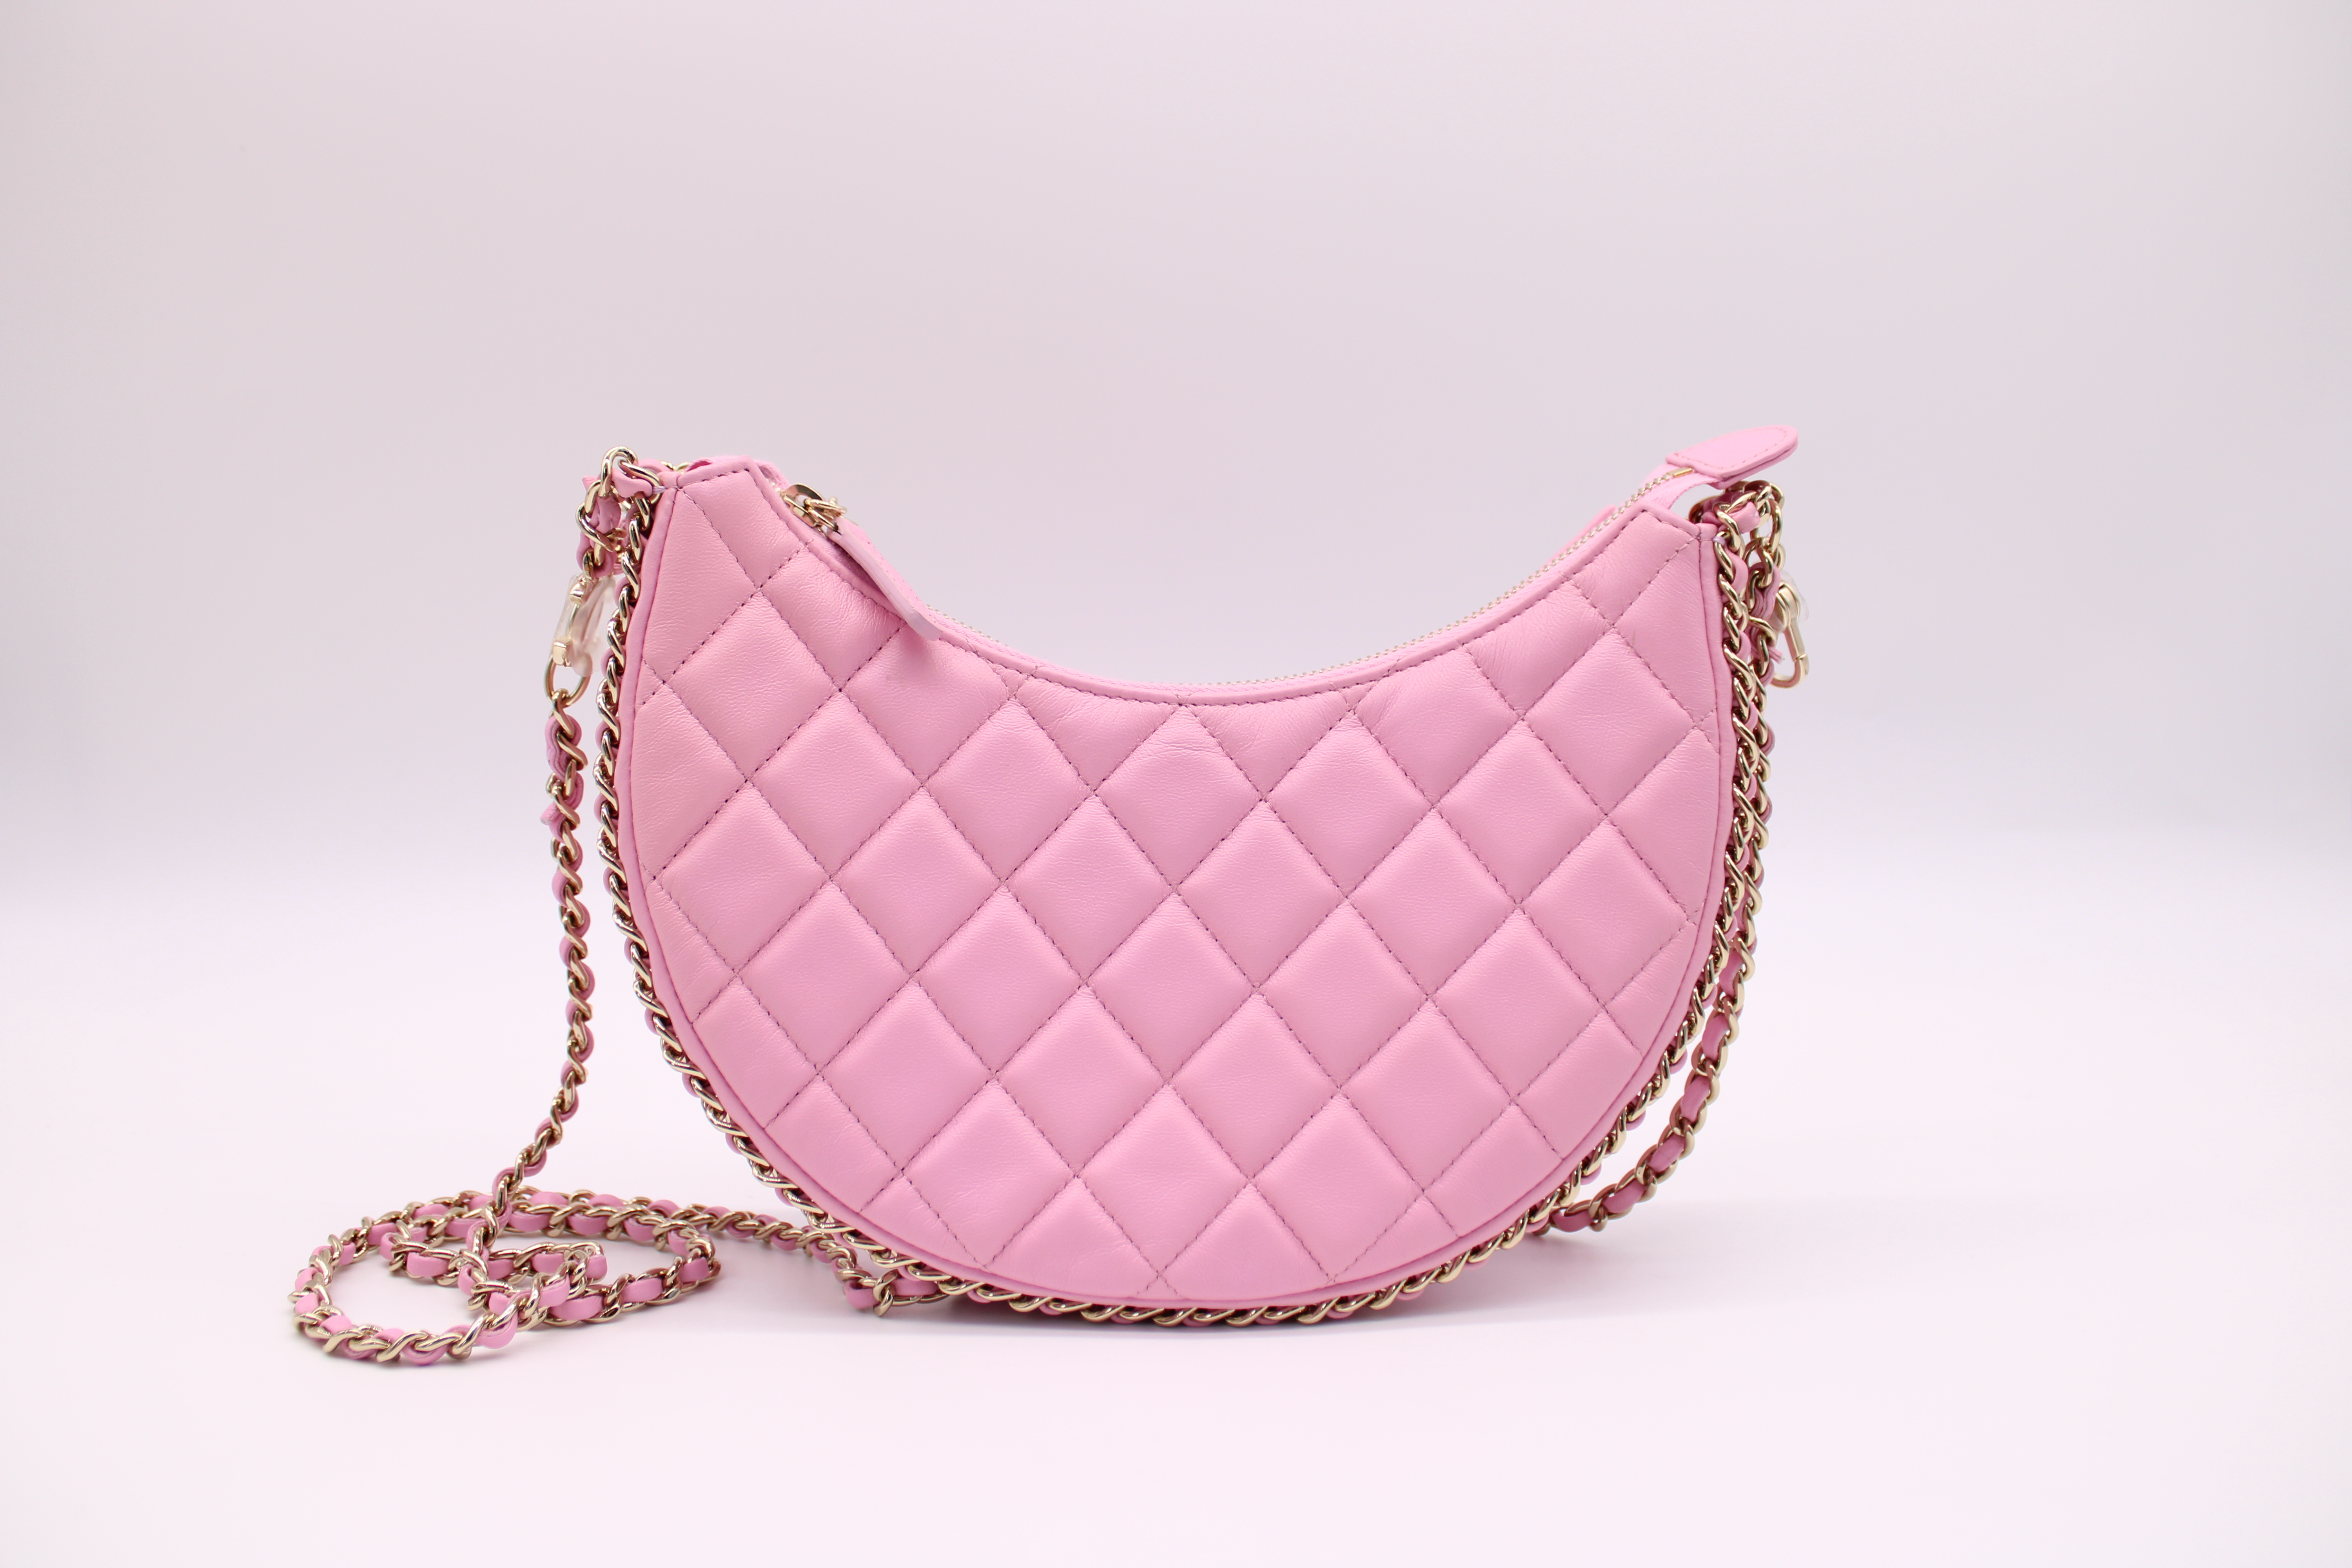 A PINK CHEVRON LAMBSKIN LEATHER NEW MINI FLAP BAG WITH GOLD HARDWARE, CHANEL,  2015-2016